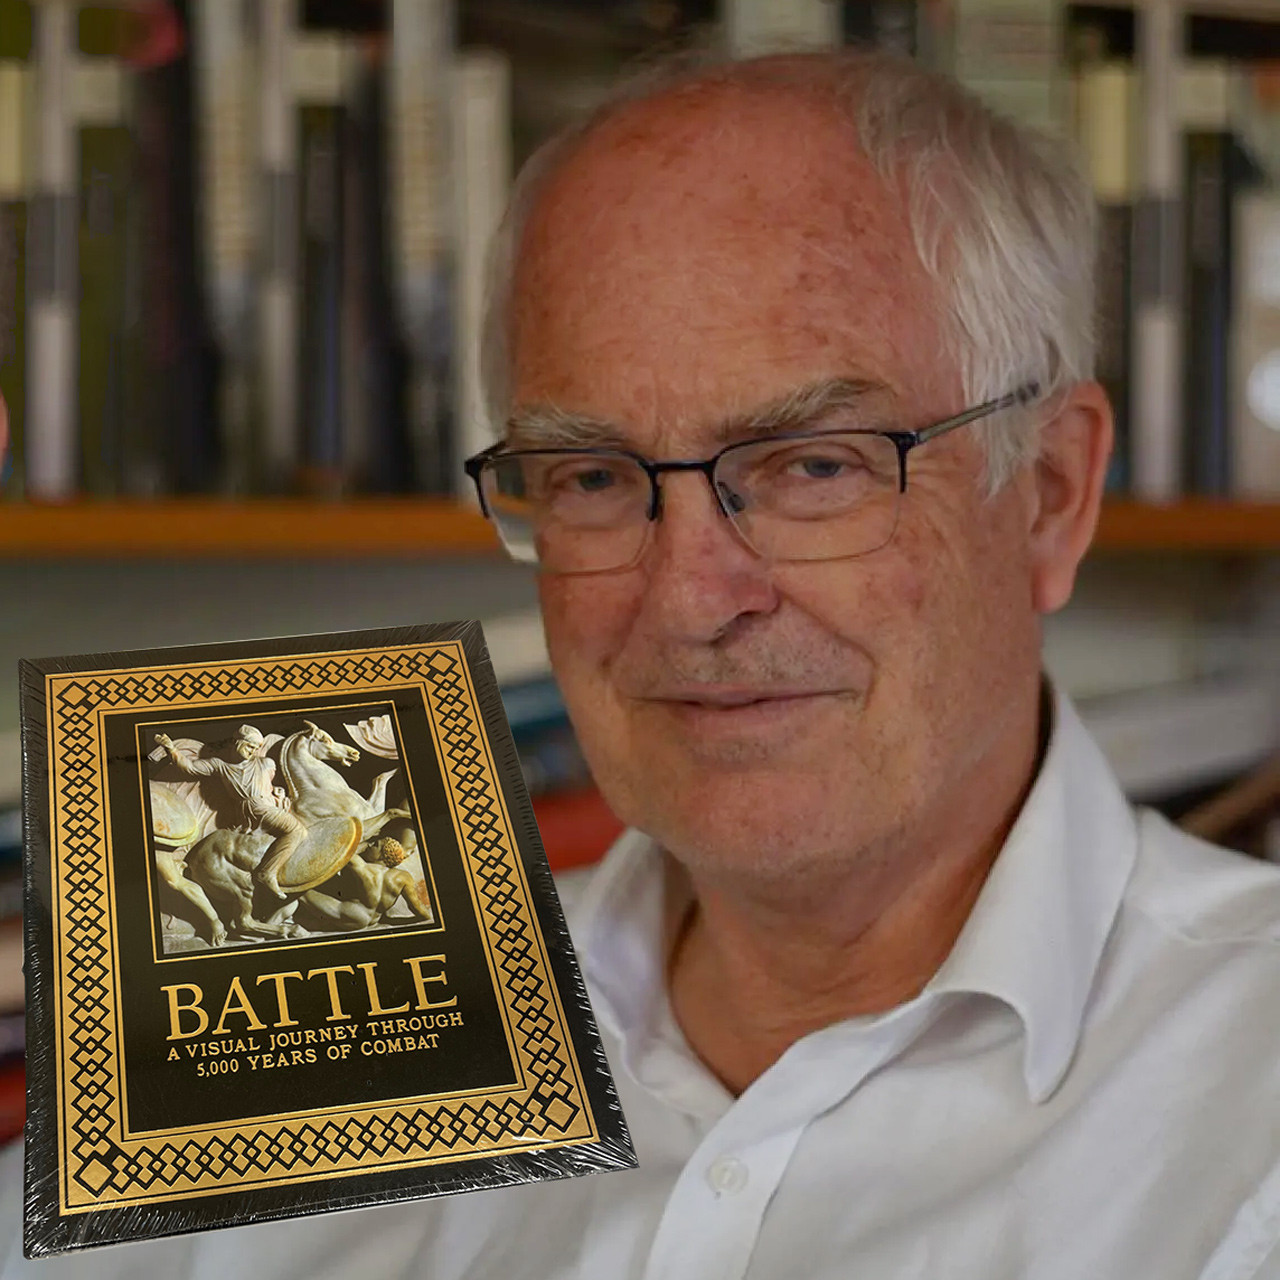 R.G. Grant "BATTLE: A Visual Journey Through 5,000 Years of Combat" Deluxe Limited Edition, Leather Bound Collector's Edition [Sealed]